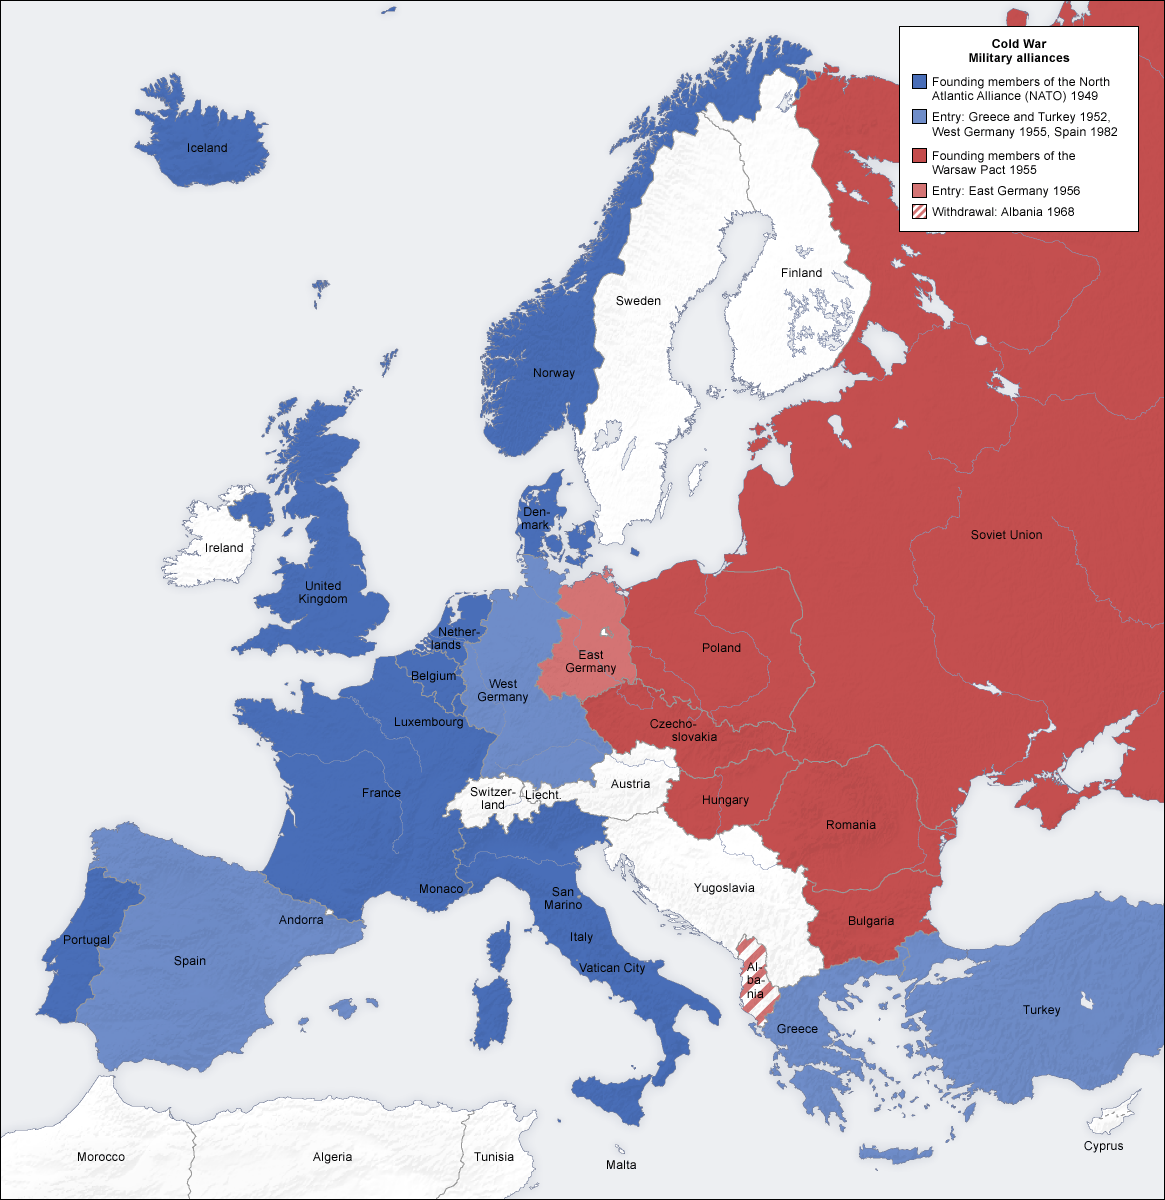 Cold-War-Military-alliance-in-Europe.png